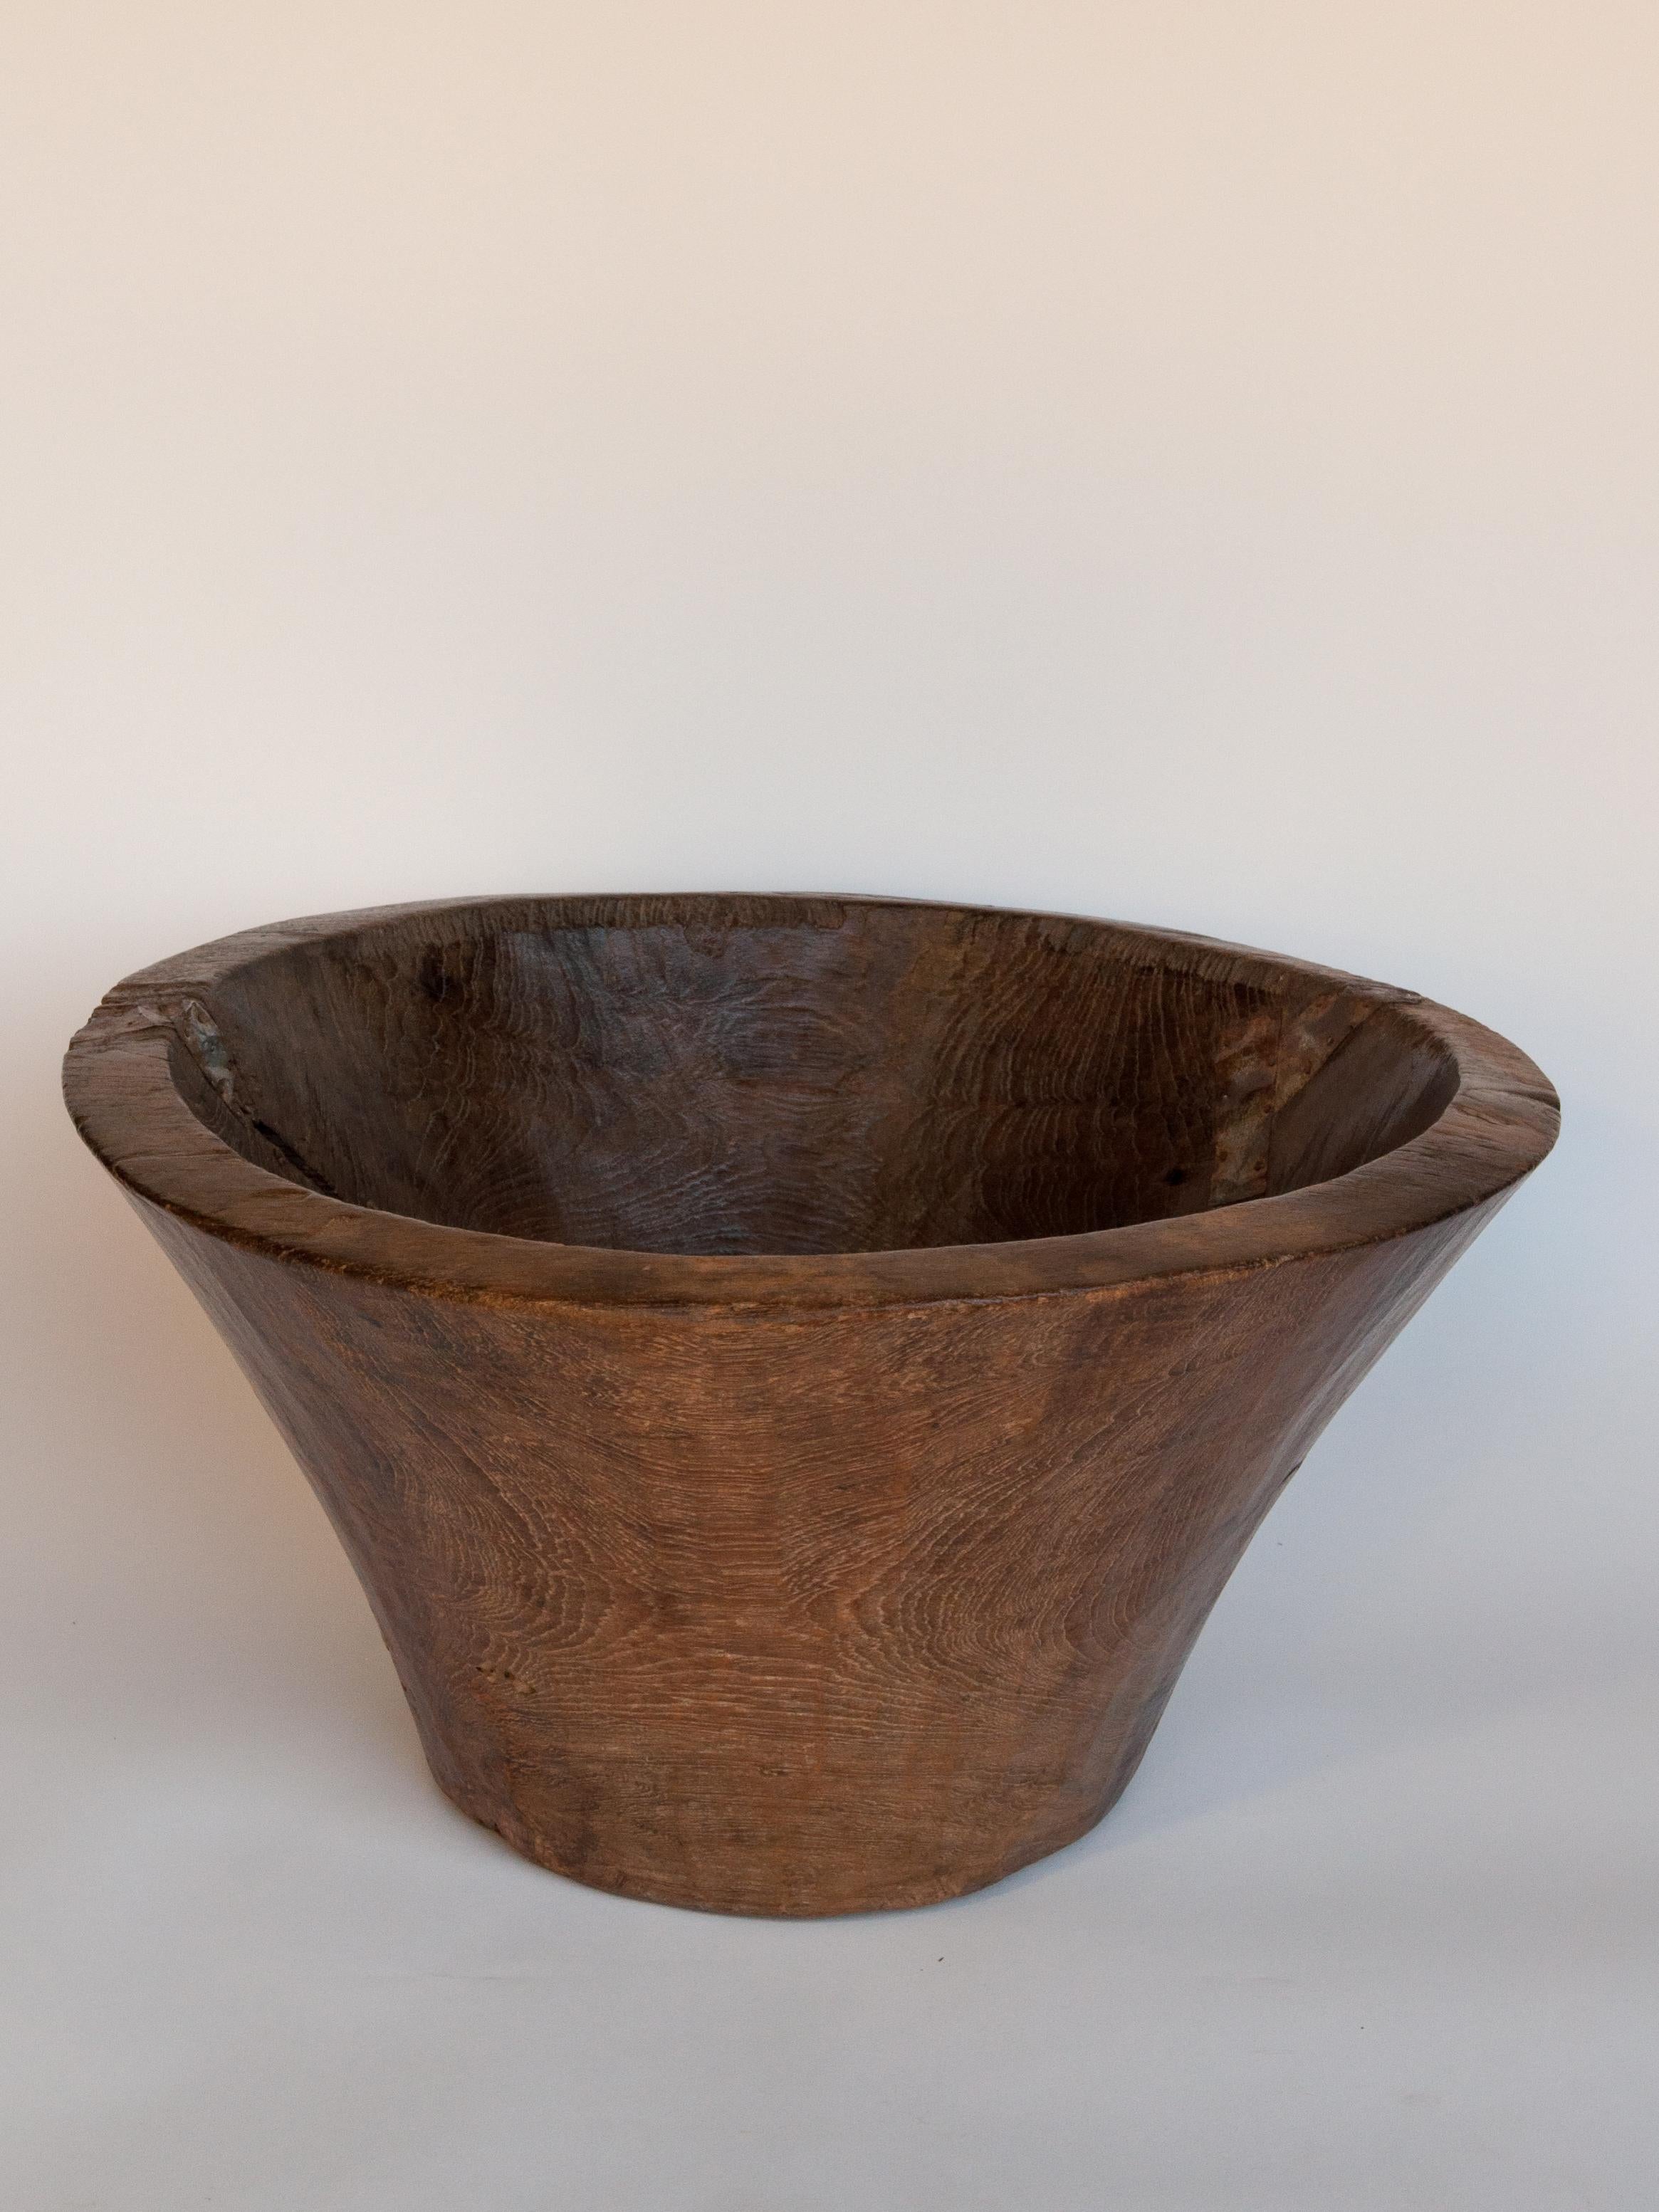 Large vintage teak bowl, hand hewn, from Cirebon, North Java, mid-20th century.
This rustic wood bowl was fashioned by hand from a single piece of teak wood and comes from the Cirebon area of Northern Java. It would have been used to offer foot or